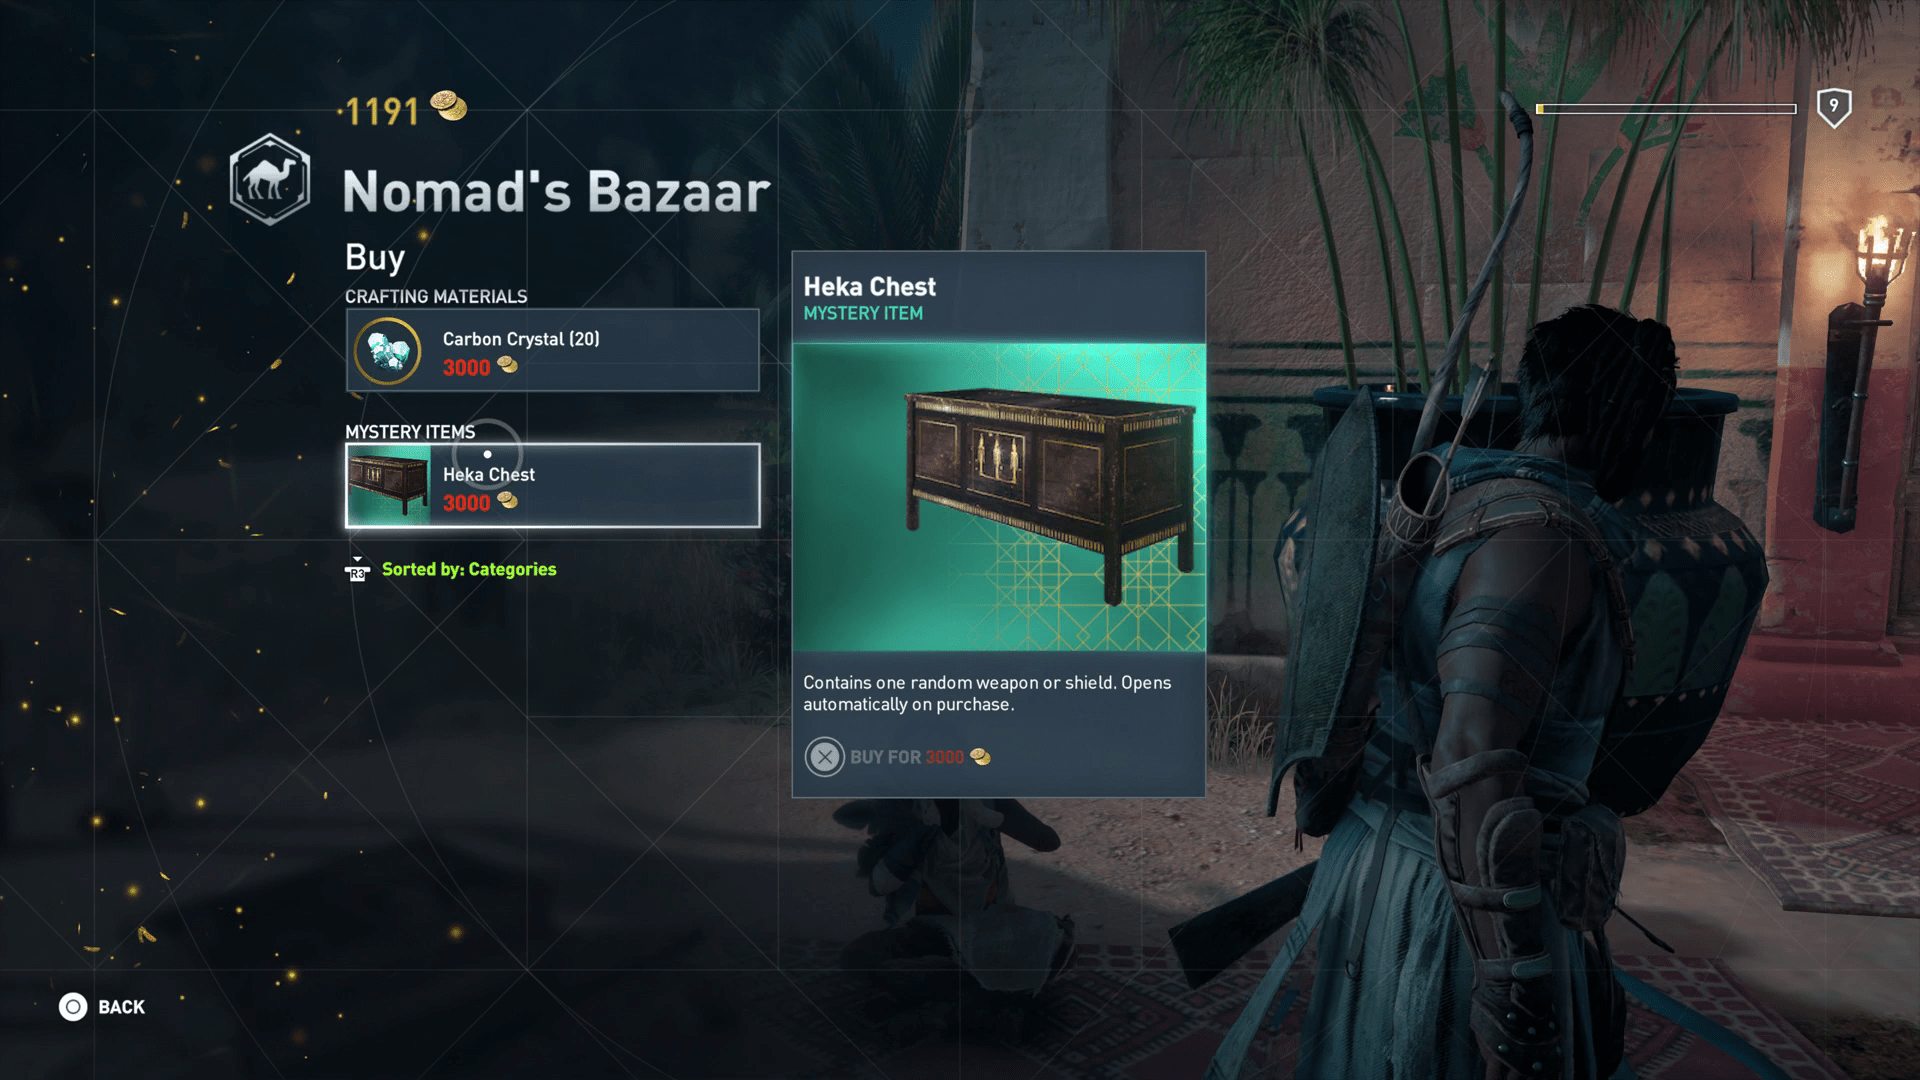 Assassin’s Creed Origins’ Microtransactions (Mostly) Get You Things You Can Earn While Playing, Ubisoft Says